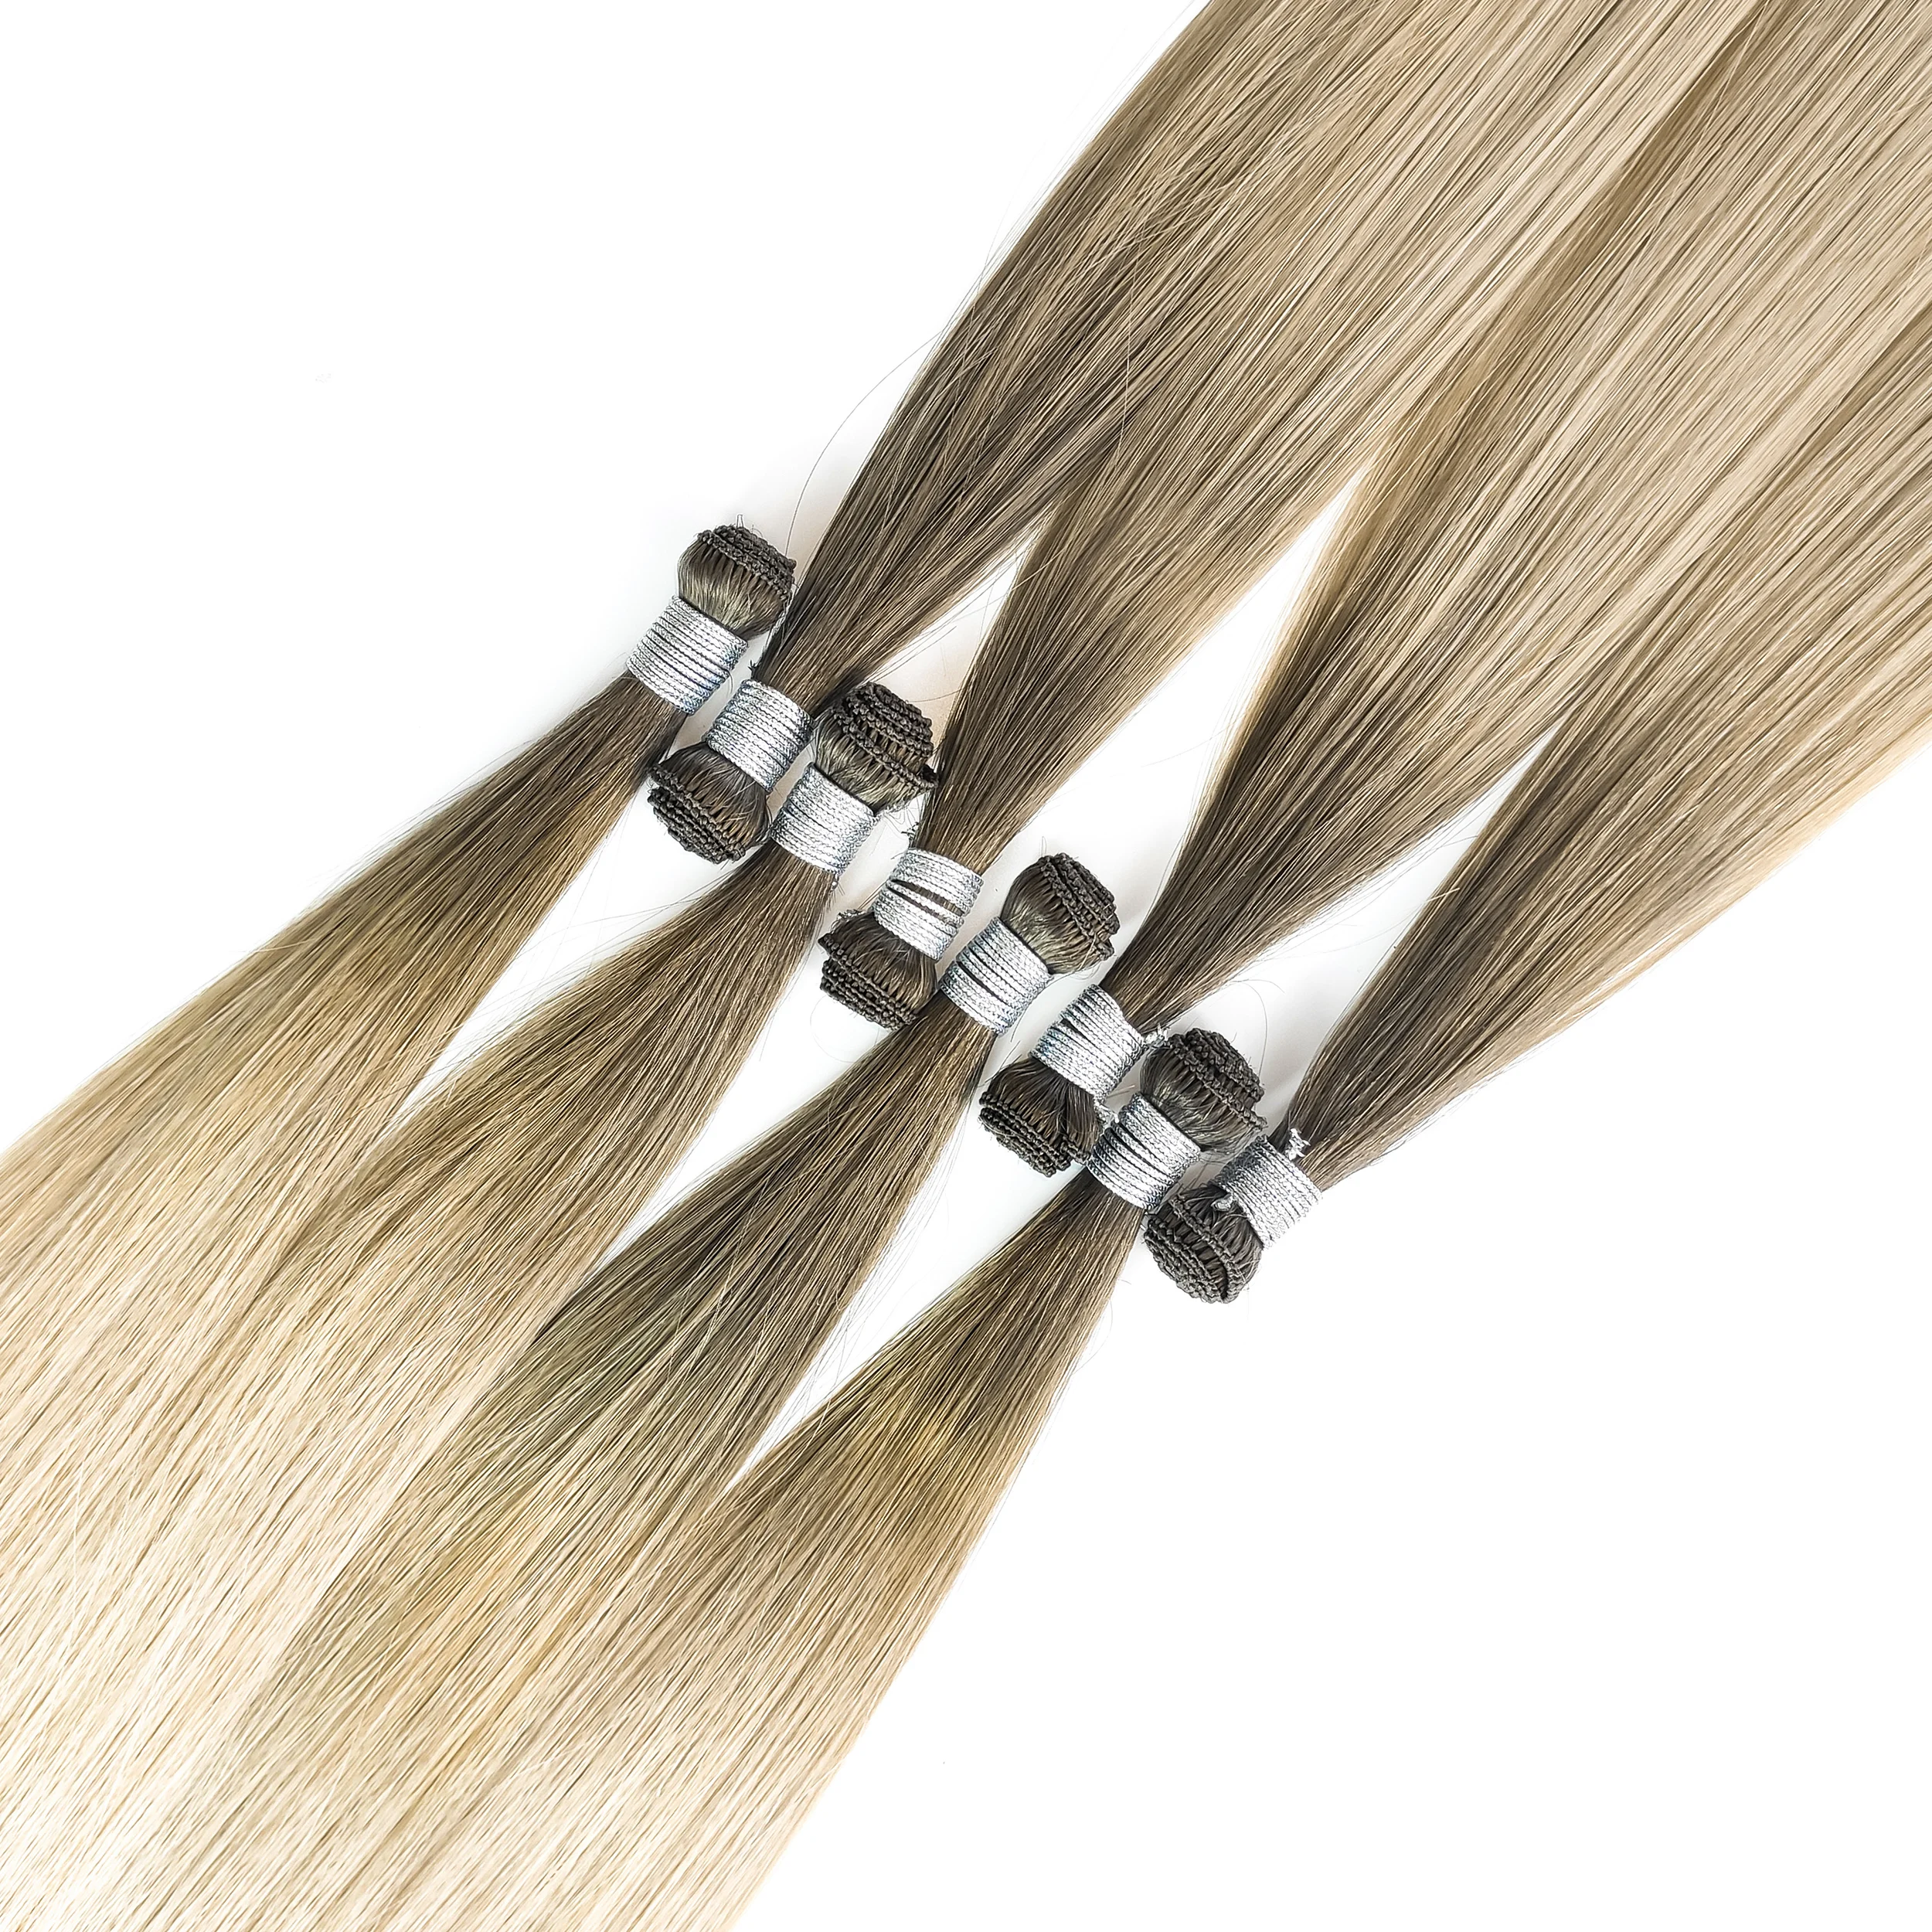 

2022 Russian 100% Virgin Cuticle Remy Aligned Human Hair Extension Seamless Thin Hand Tied Hair Weft #613 Blonde 24 Inch